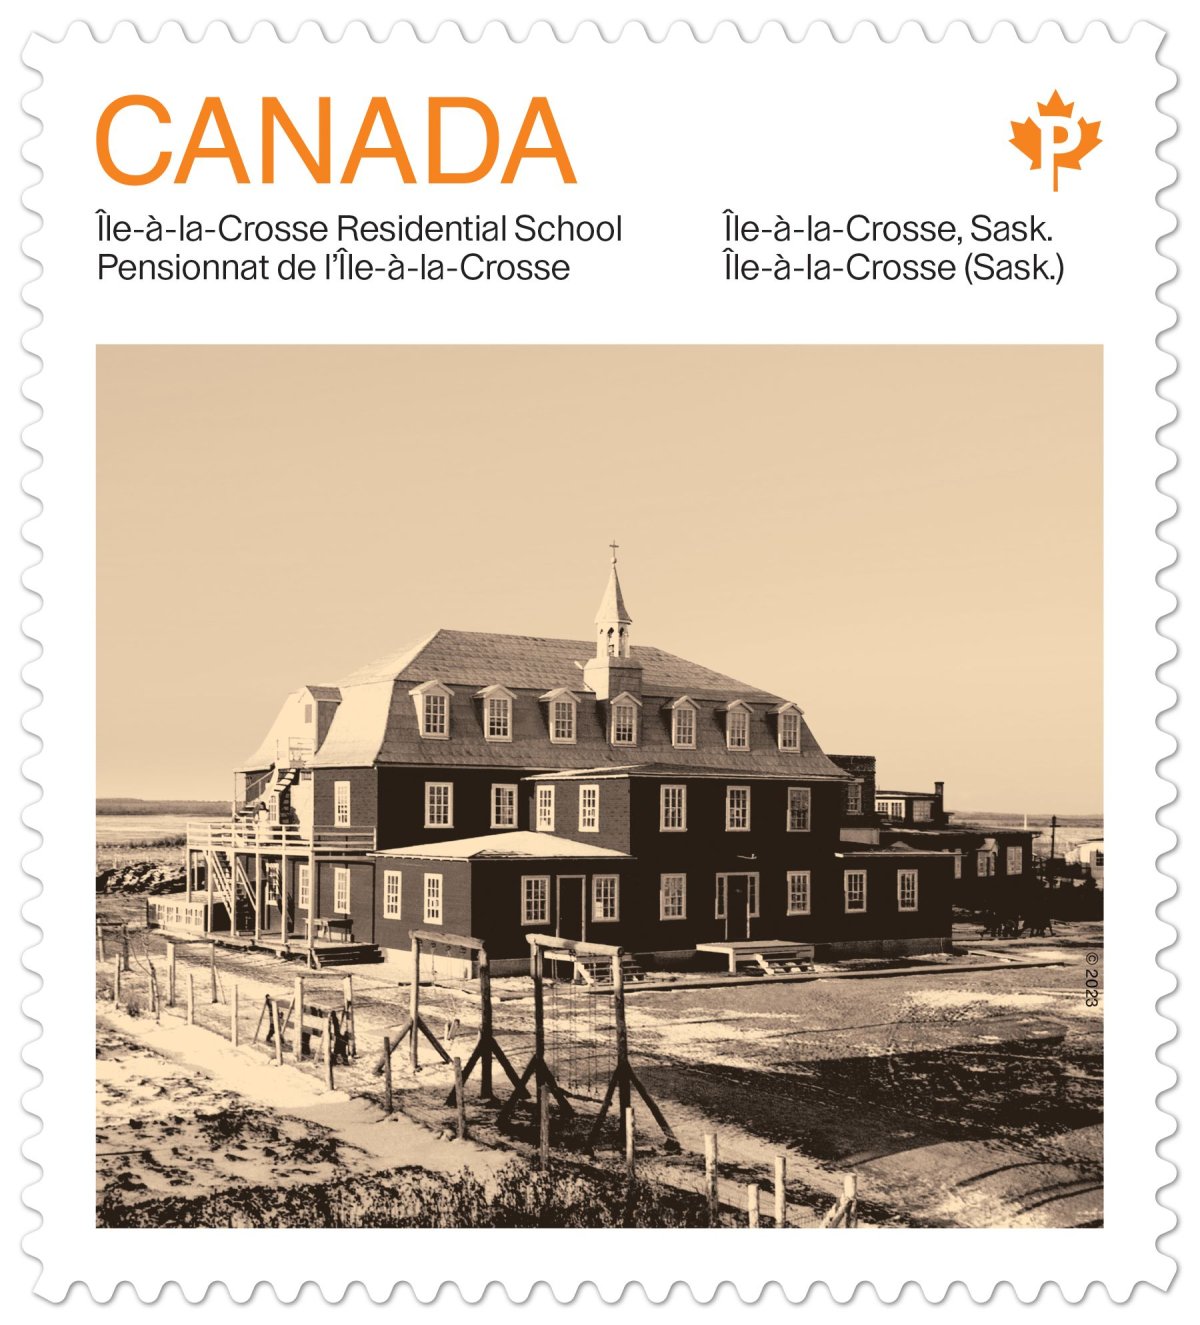 Despite the intent of featuring the Île-à-la-Crosse Residential School on this year's Canada Post Truth and Reconciliation stamps, many have expressed misgivings.